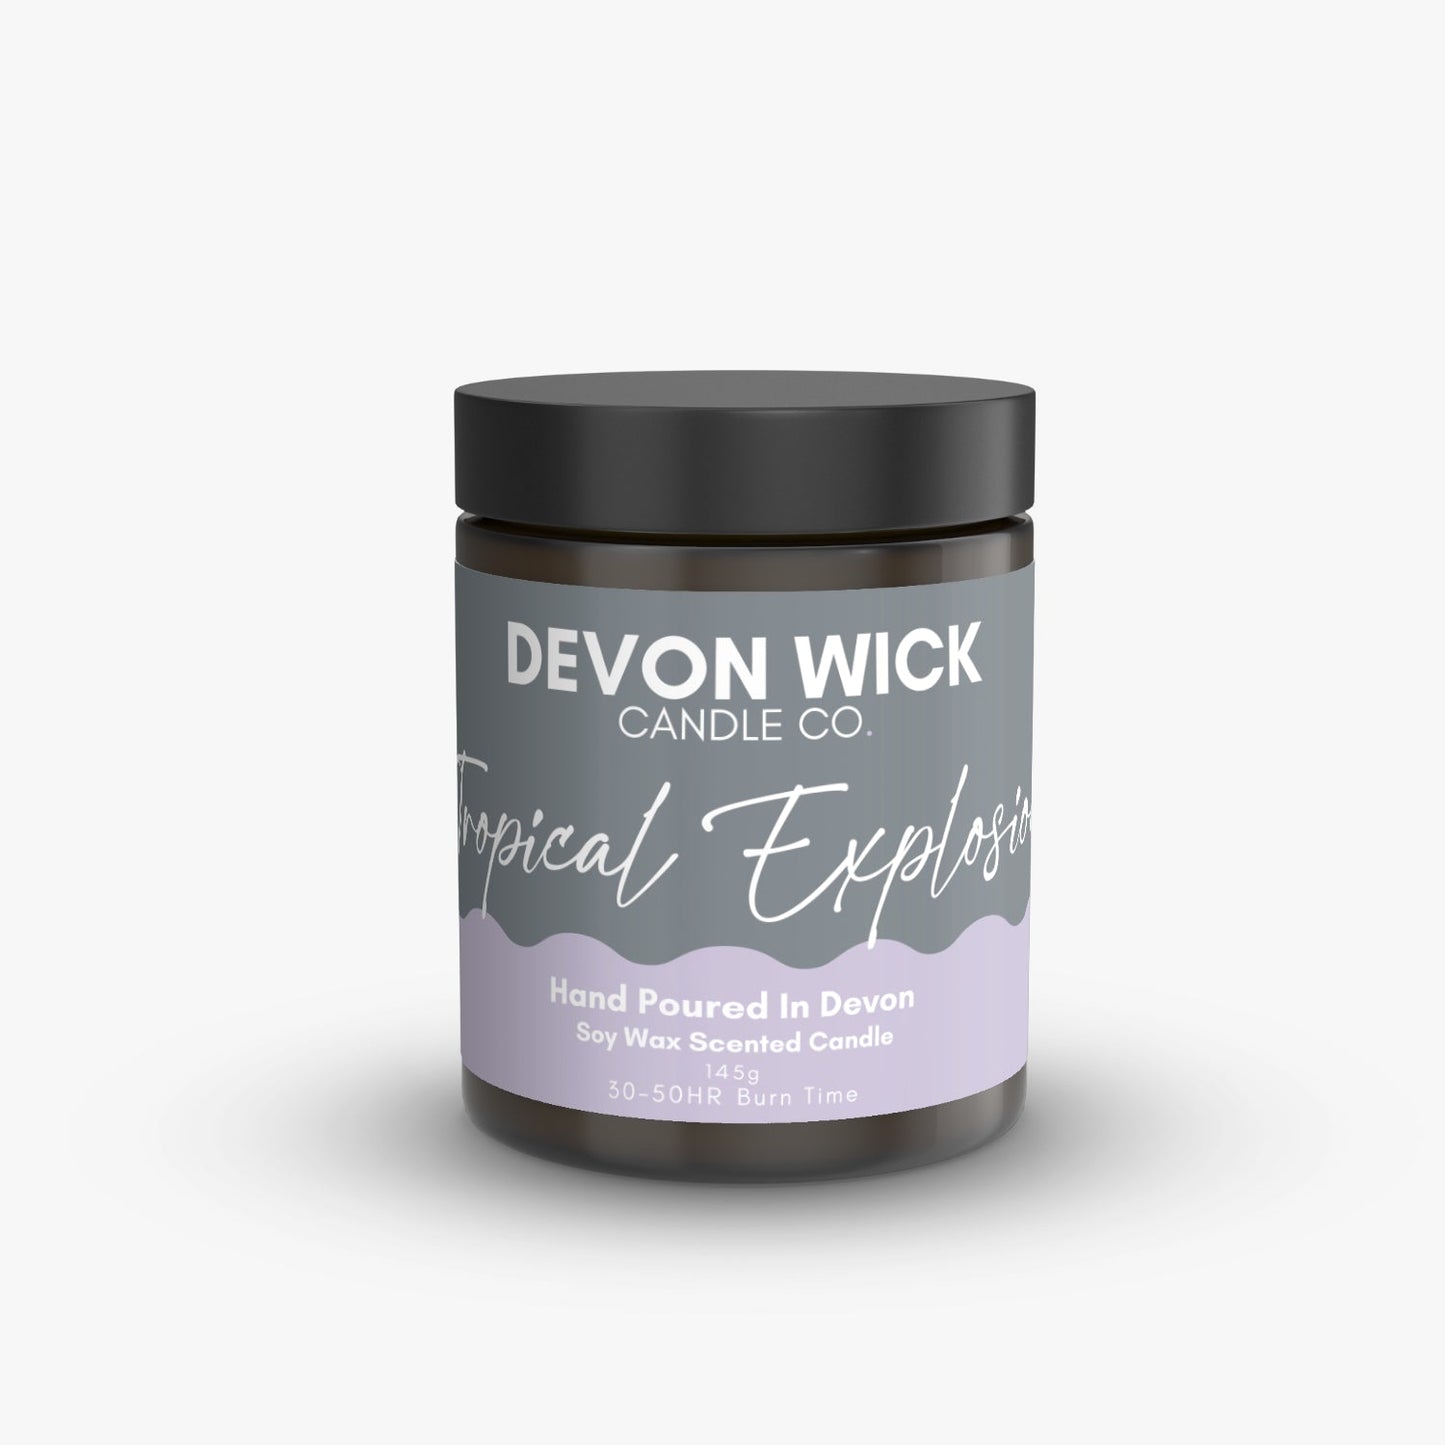 Devon Wick Candle Co. Limited Tropical Explosion Soy Wax Candle